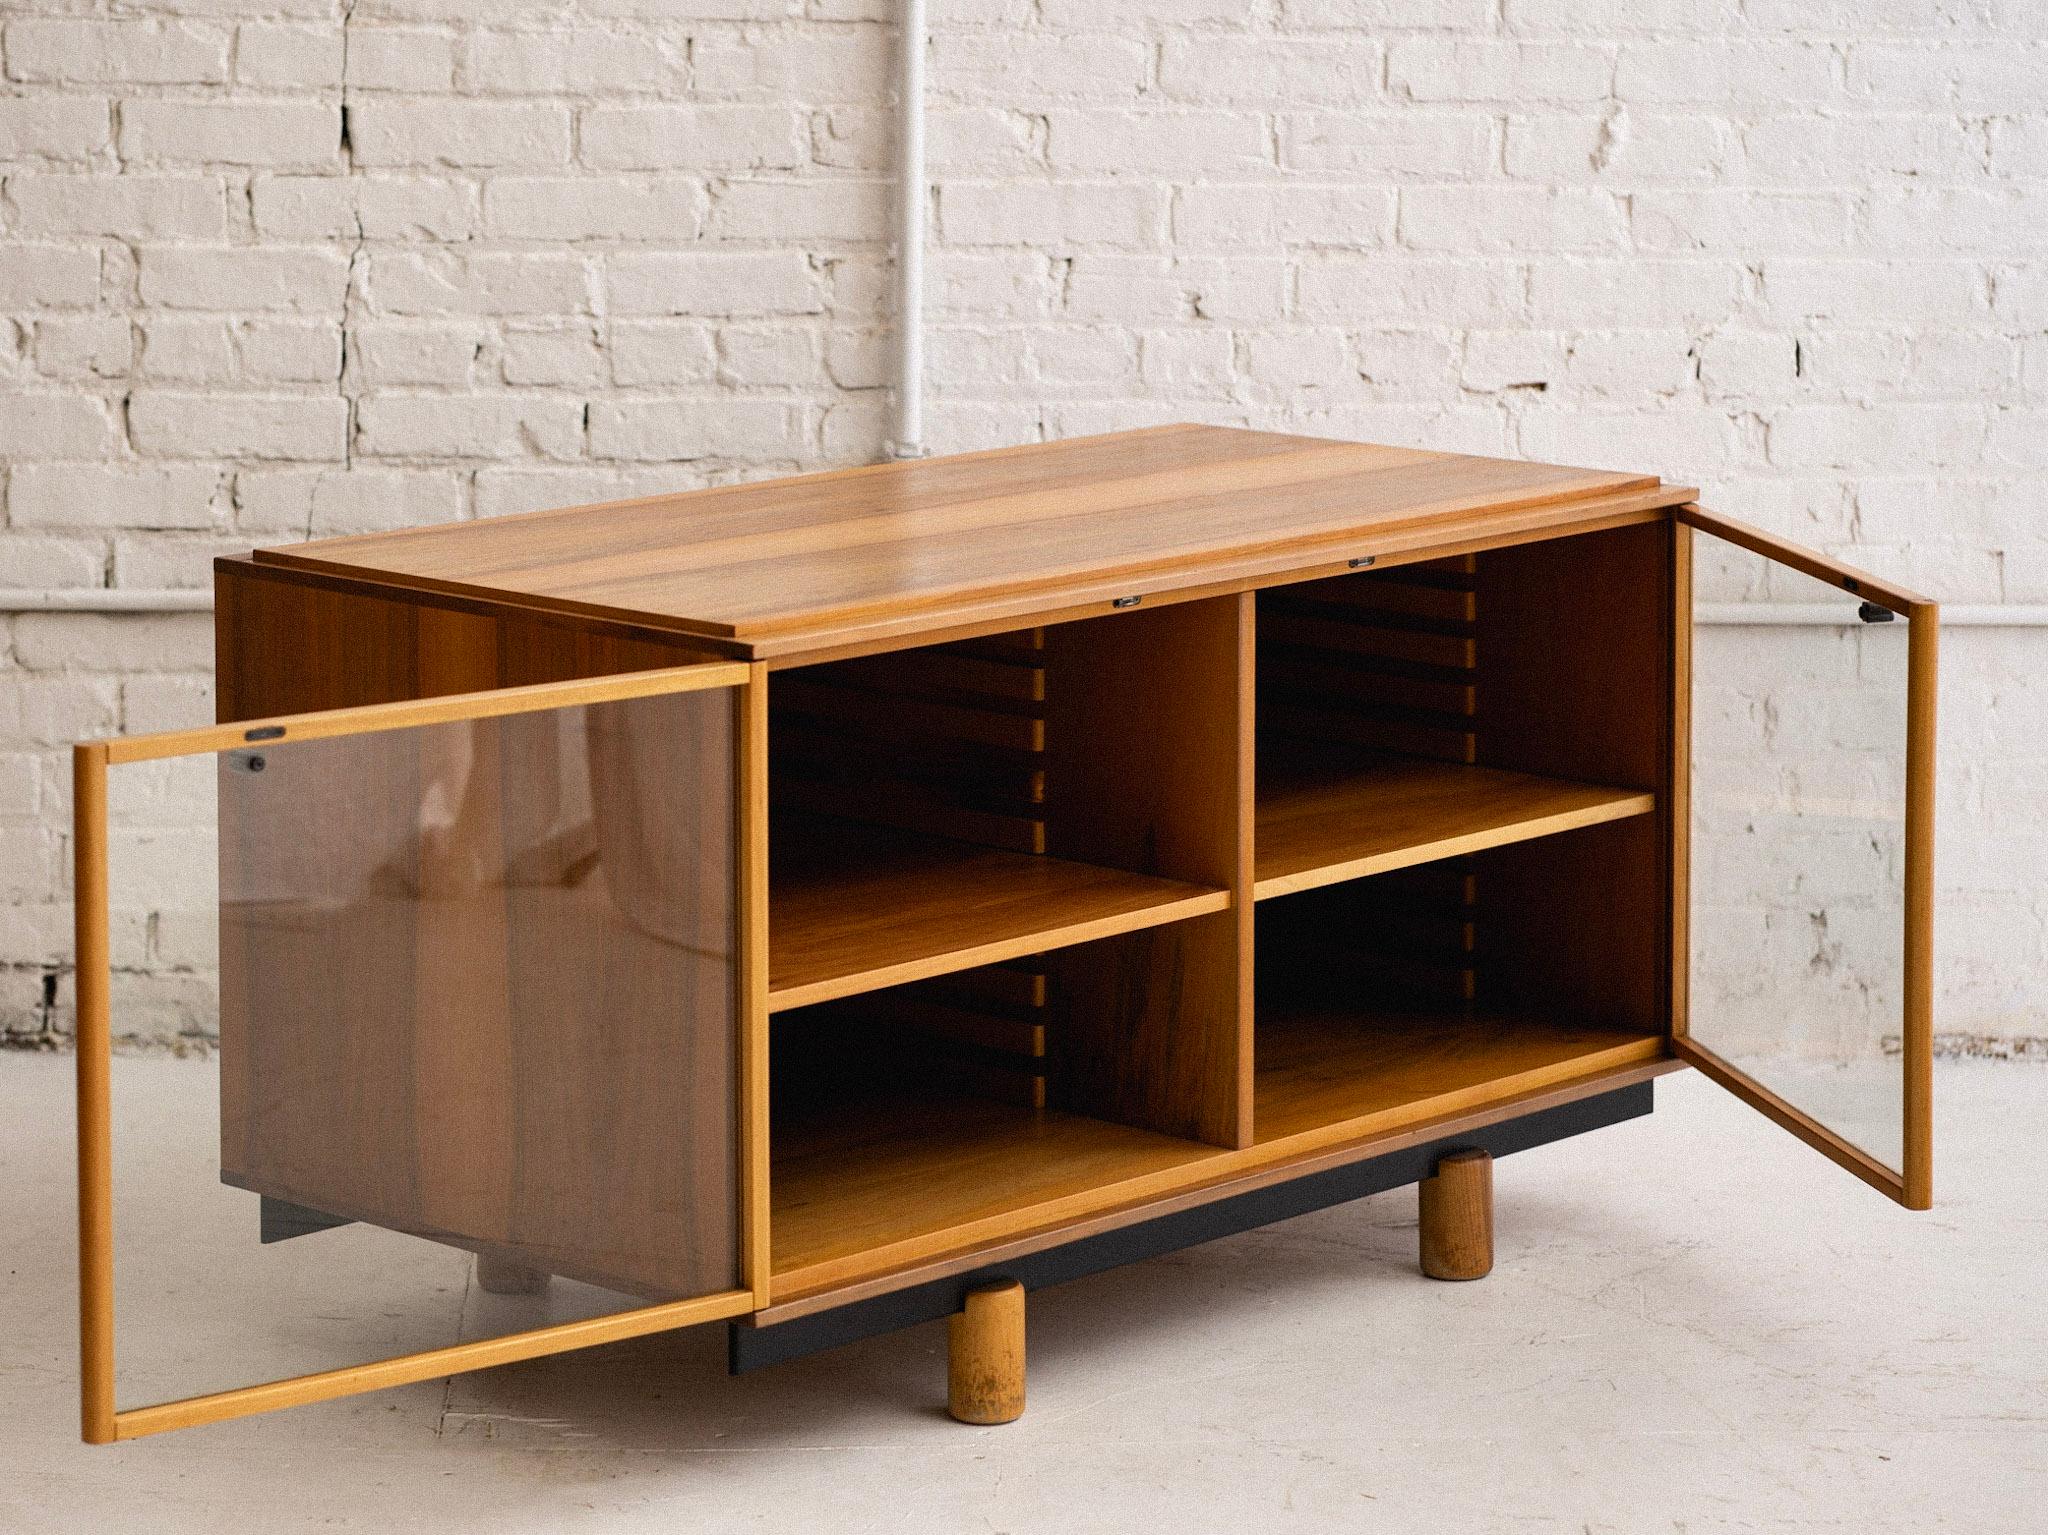 ‘Ovunque 806’ Modular Glass Door Sideboard by Gianfranco Frattini for Bernini In Good Condition For Sale In Brooklyn, NY